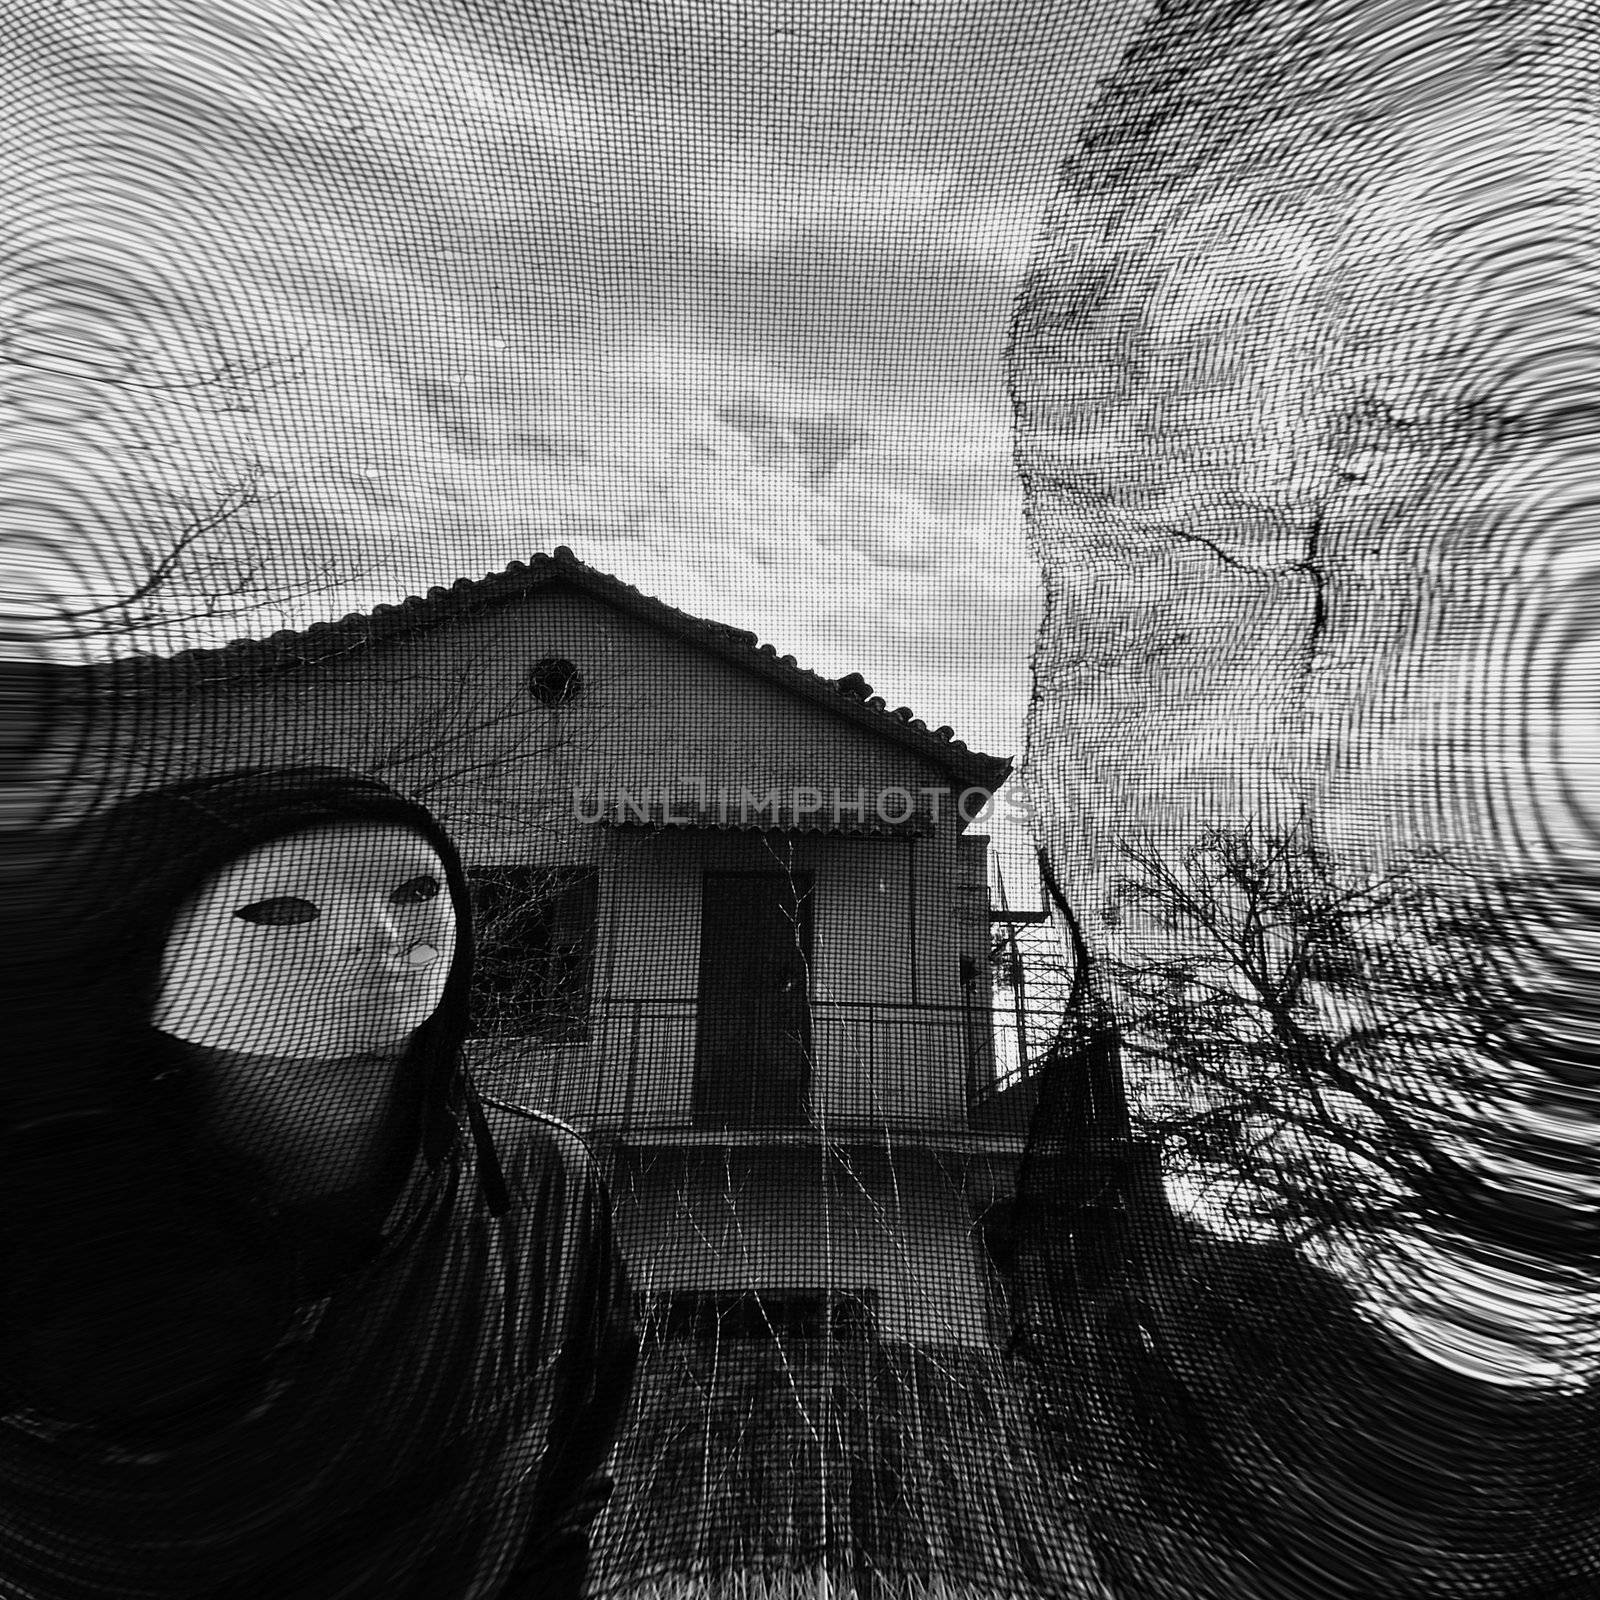 Masked figure behind threaded window. Black and white.